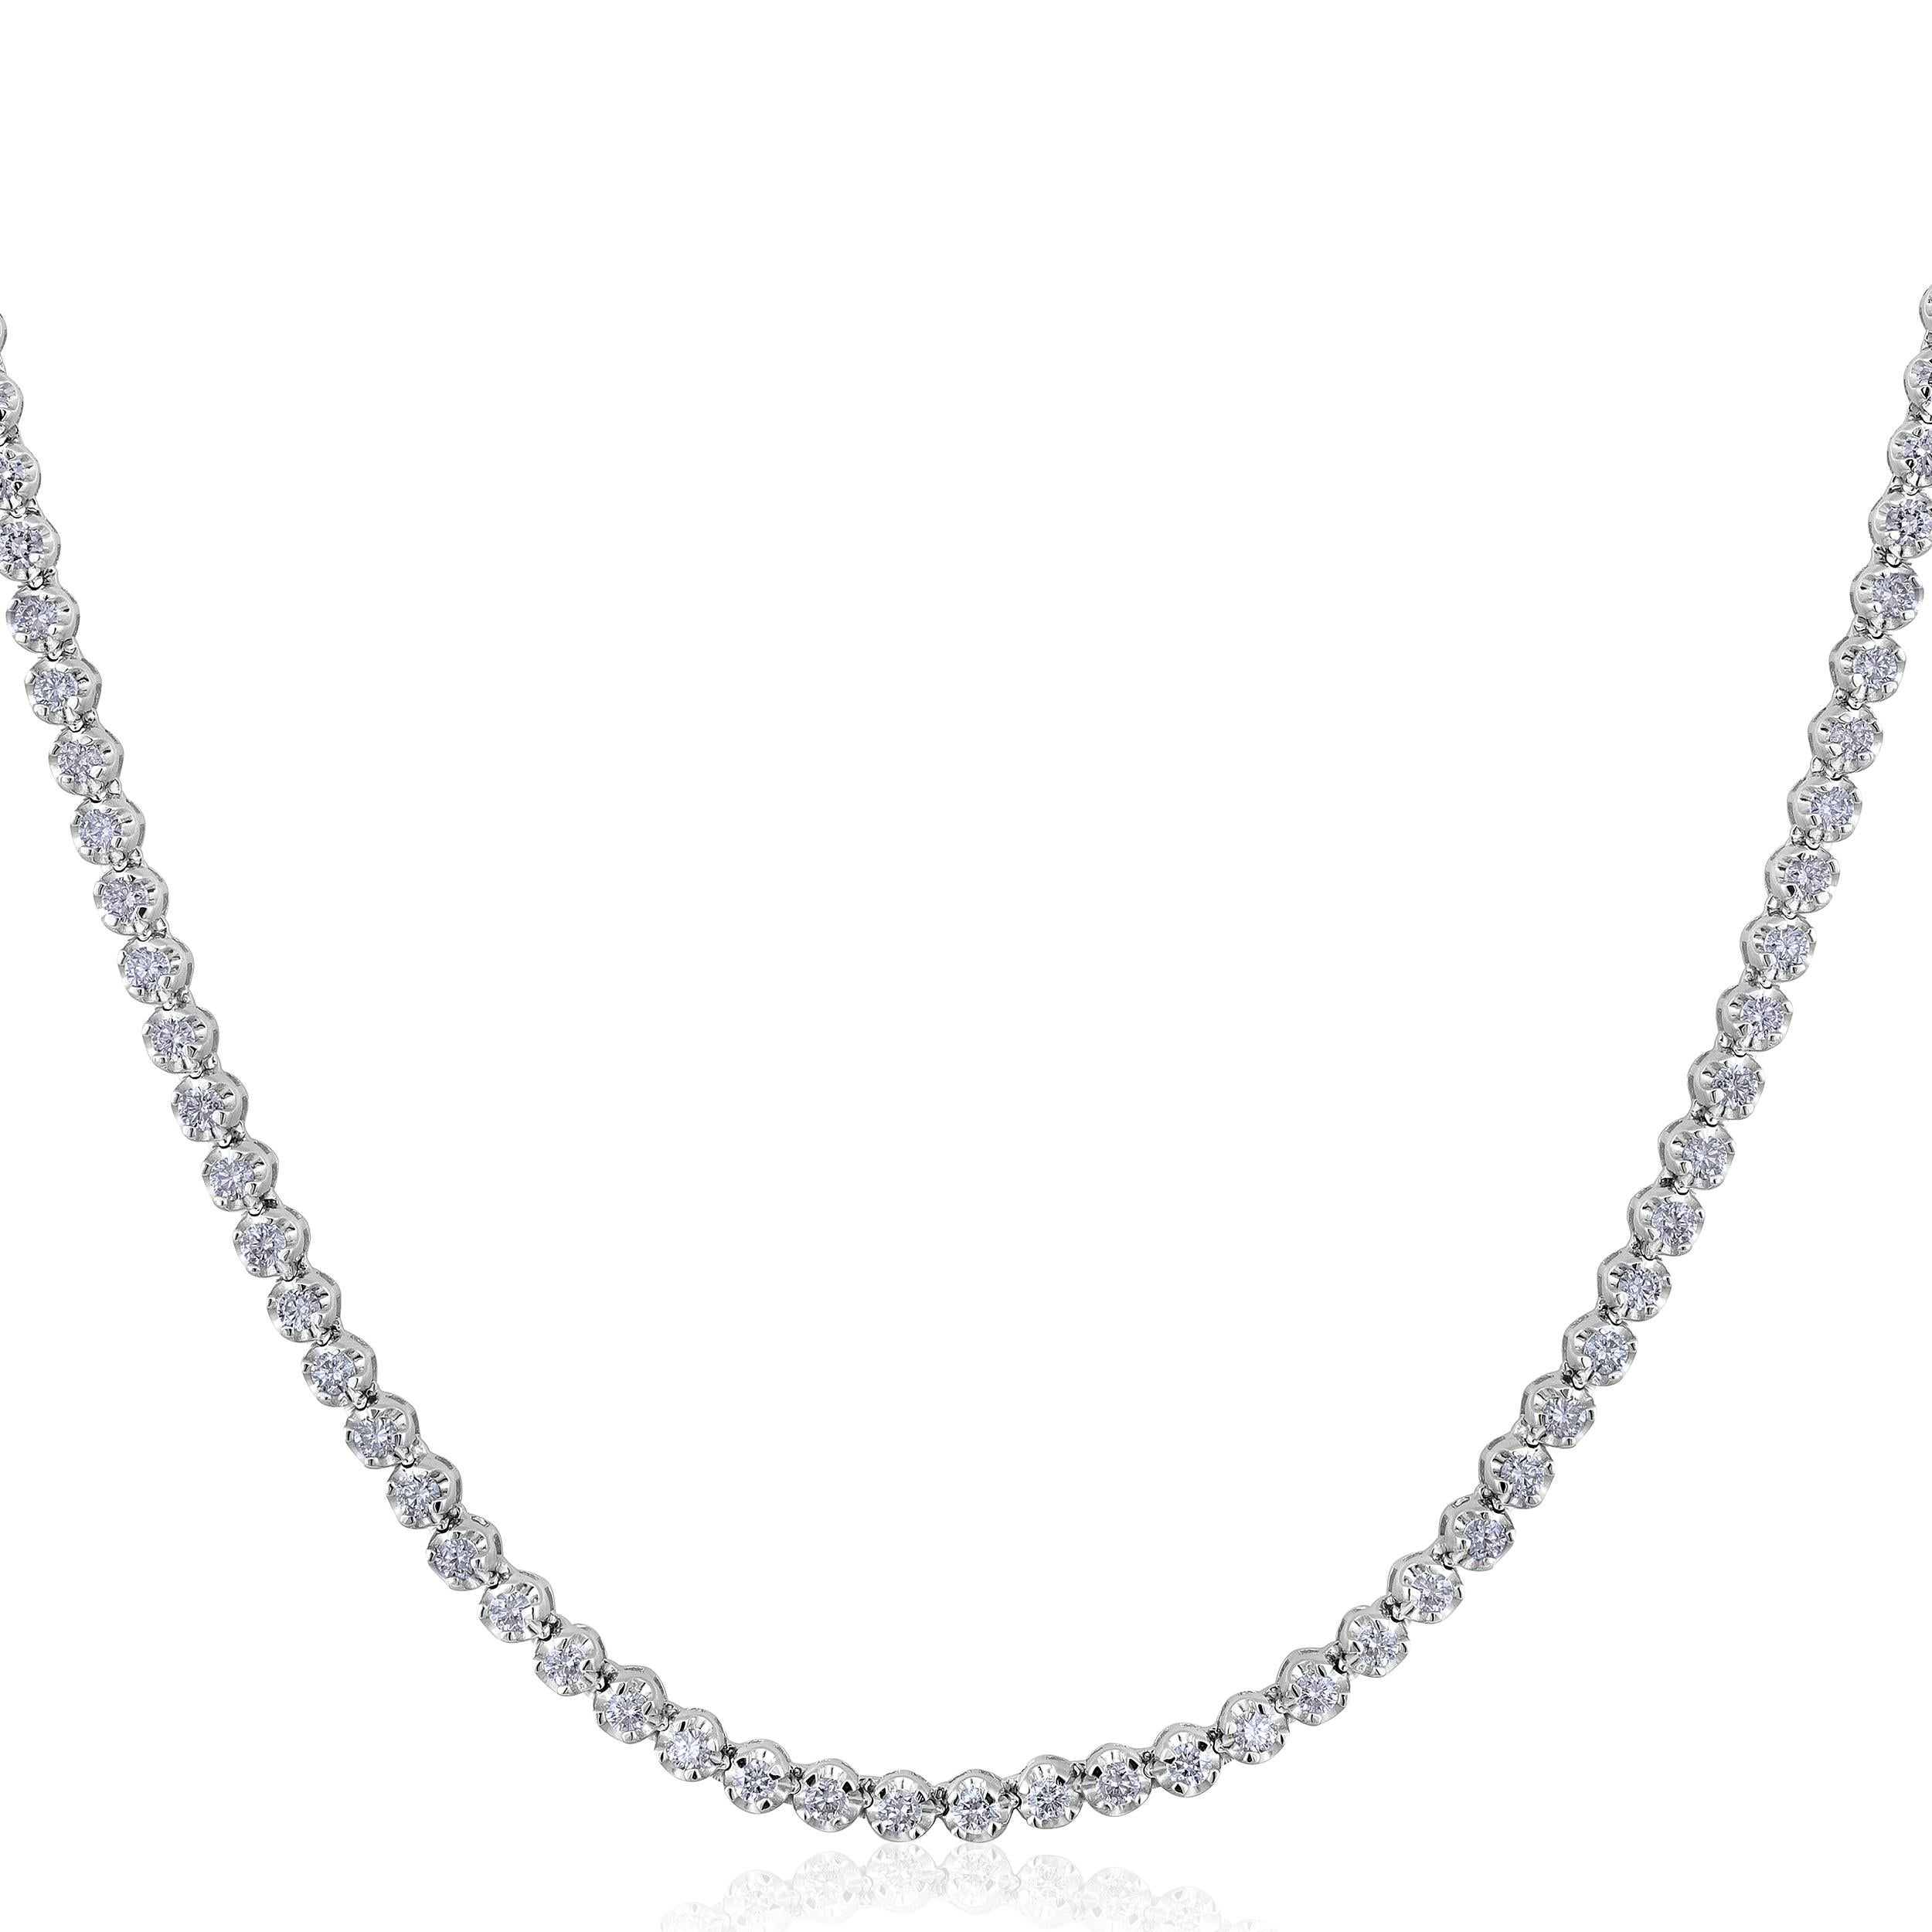 Crafted in 12.4 grams of 14K White Gold, the necklace contains 122 stones of Round Natural Diamonds with a total of 2.99 carat in G-H color and SI clarity. The necklace length is 18 inches.

CONTEMPORARY AND TIMELESS ESSENCE: Crafted in